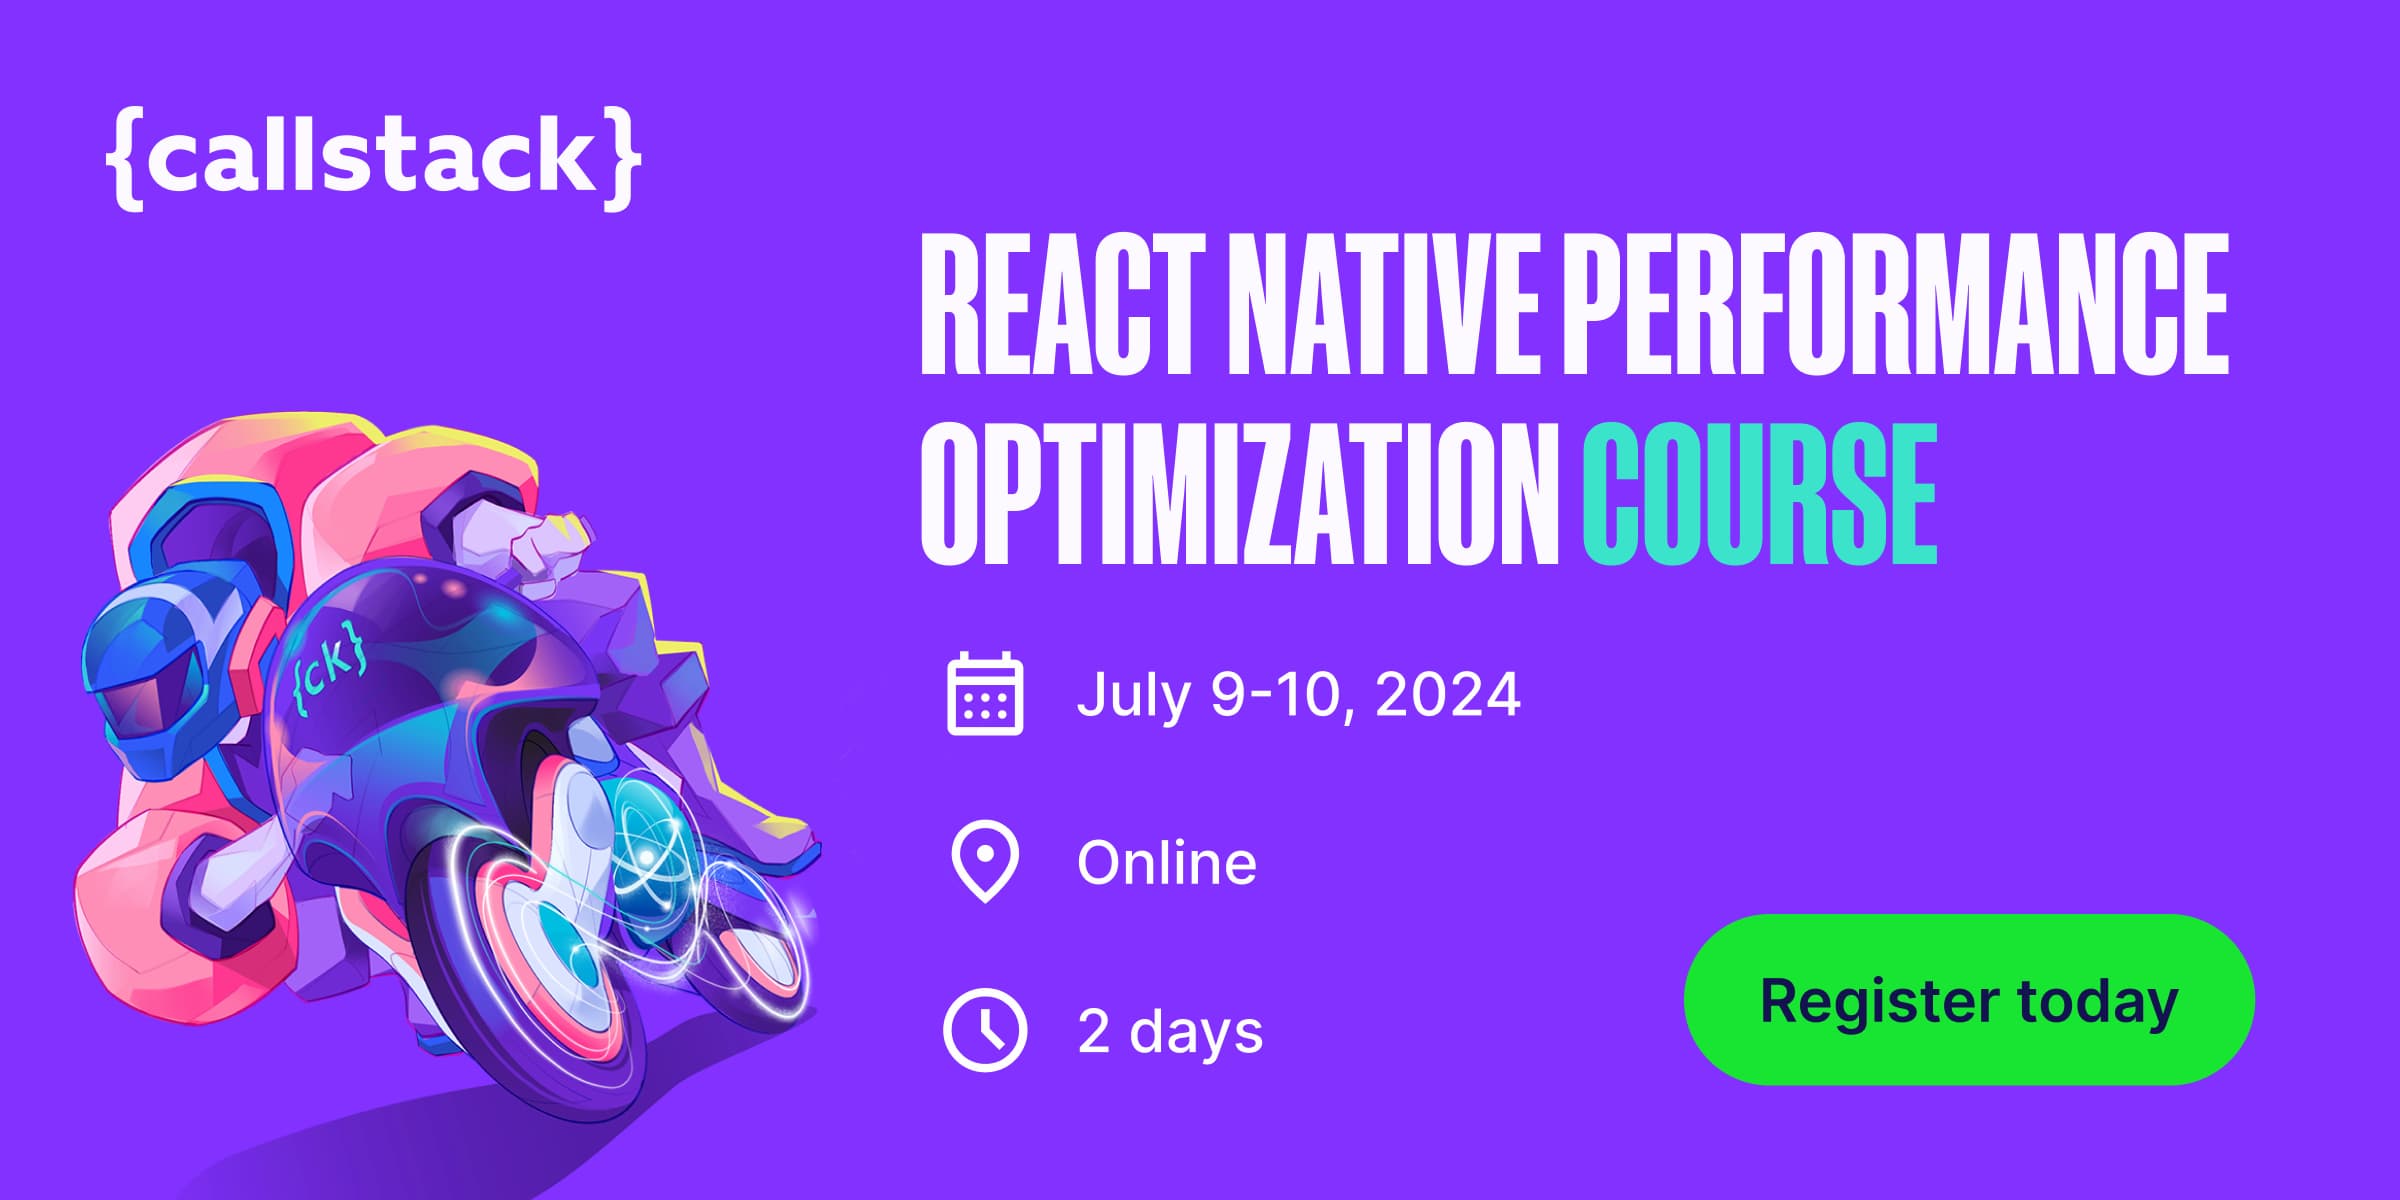 Join The React Native Performance Optimization Course